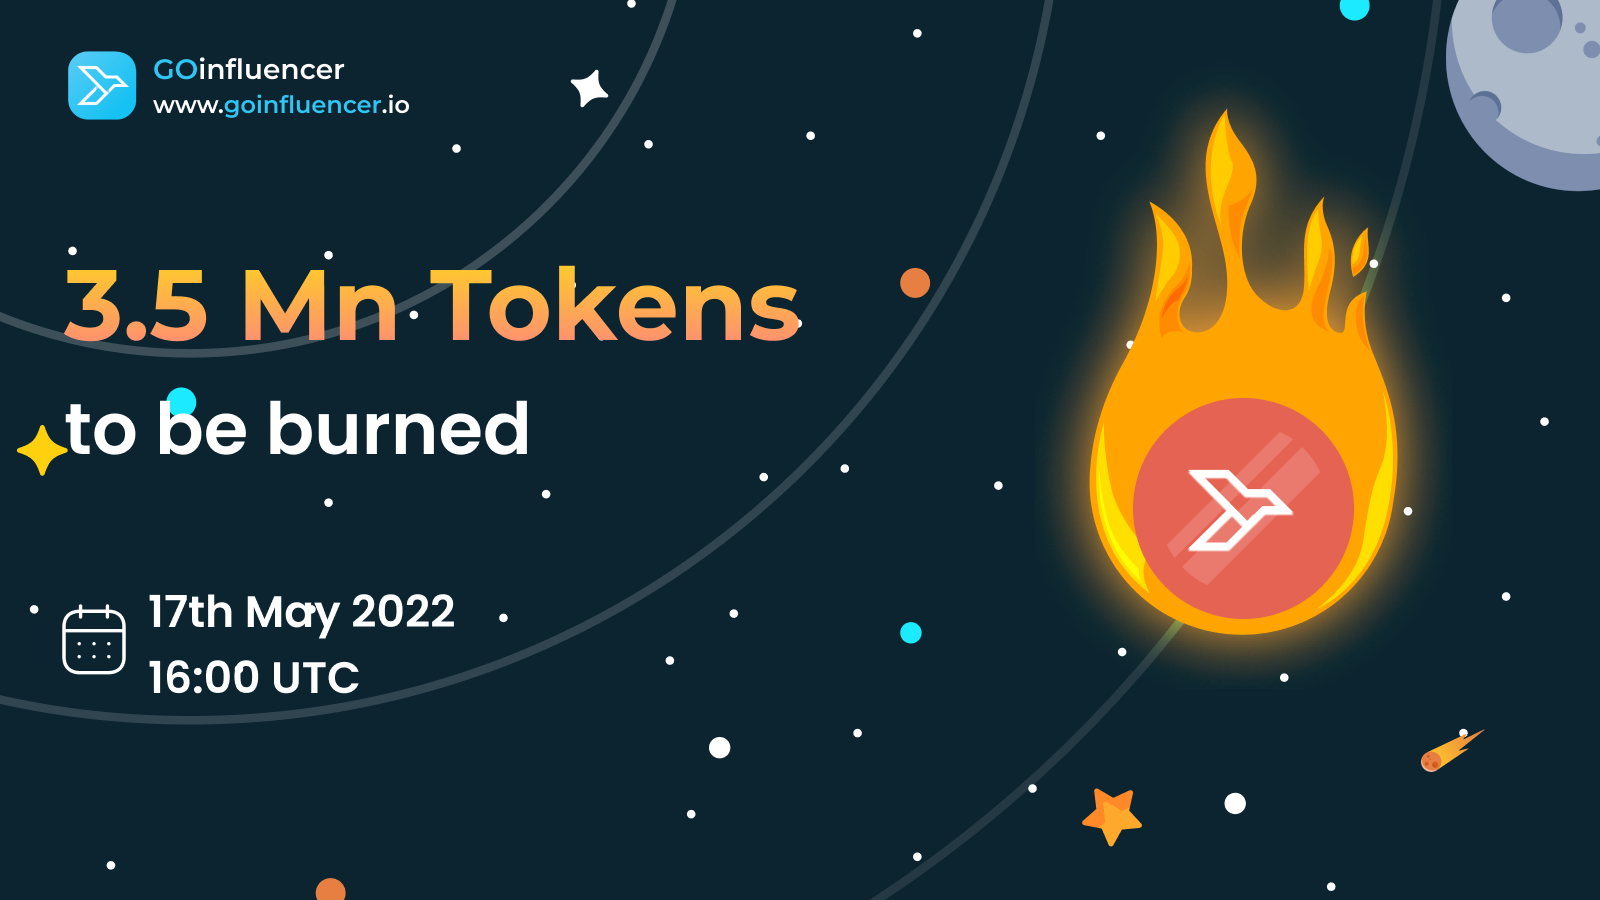 GOinfluencer to burn tokens worth 50% of its April 2022 revenue on 17th May 2022